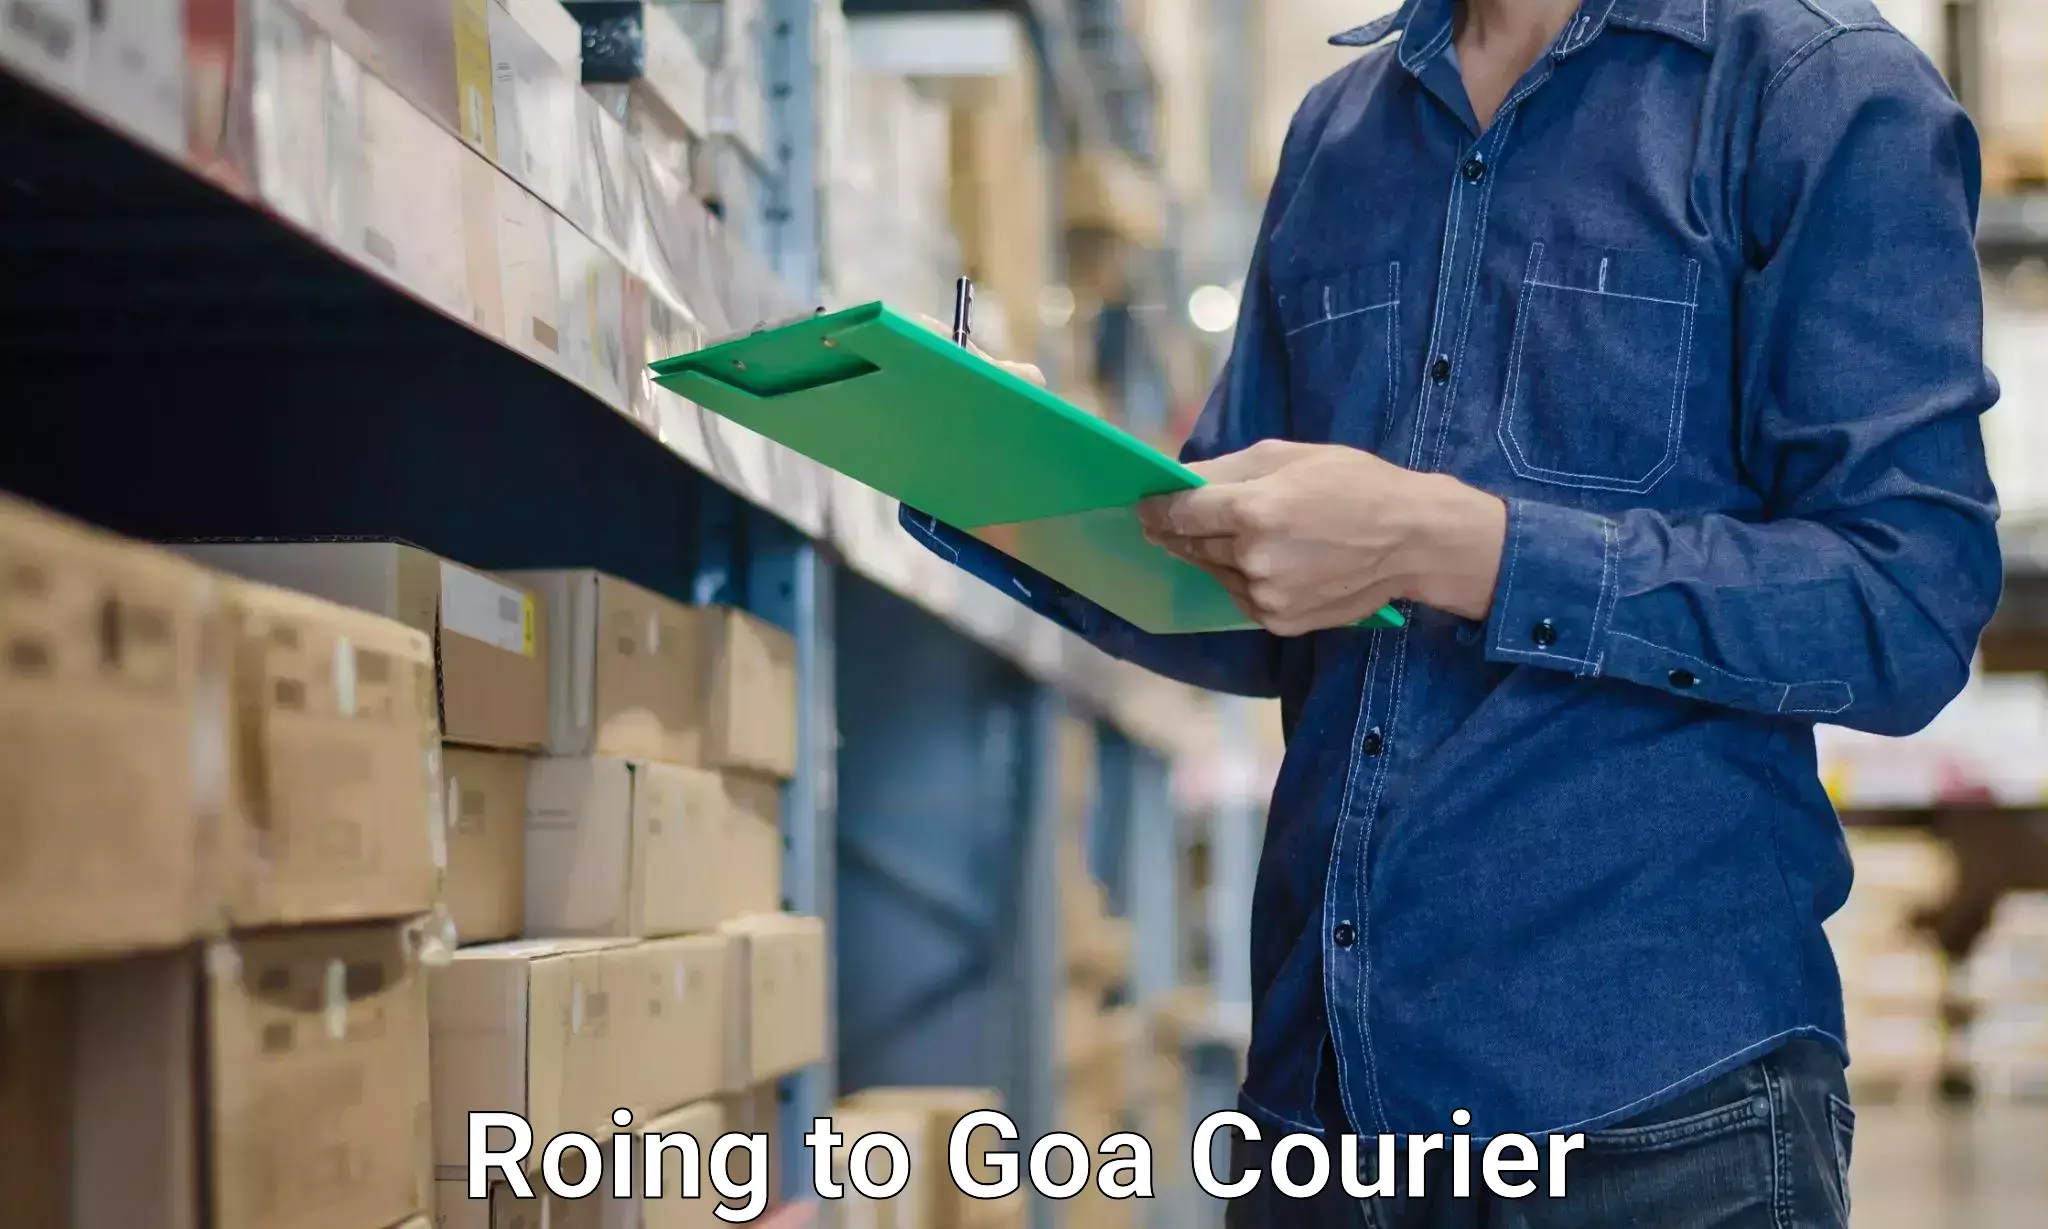 Residential moving experts Roing to Goa